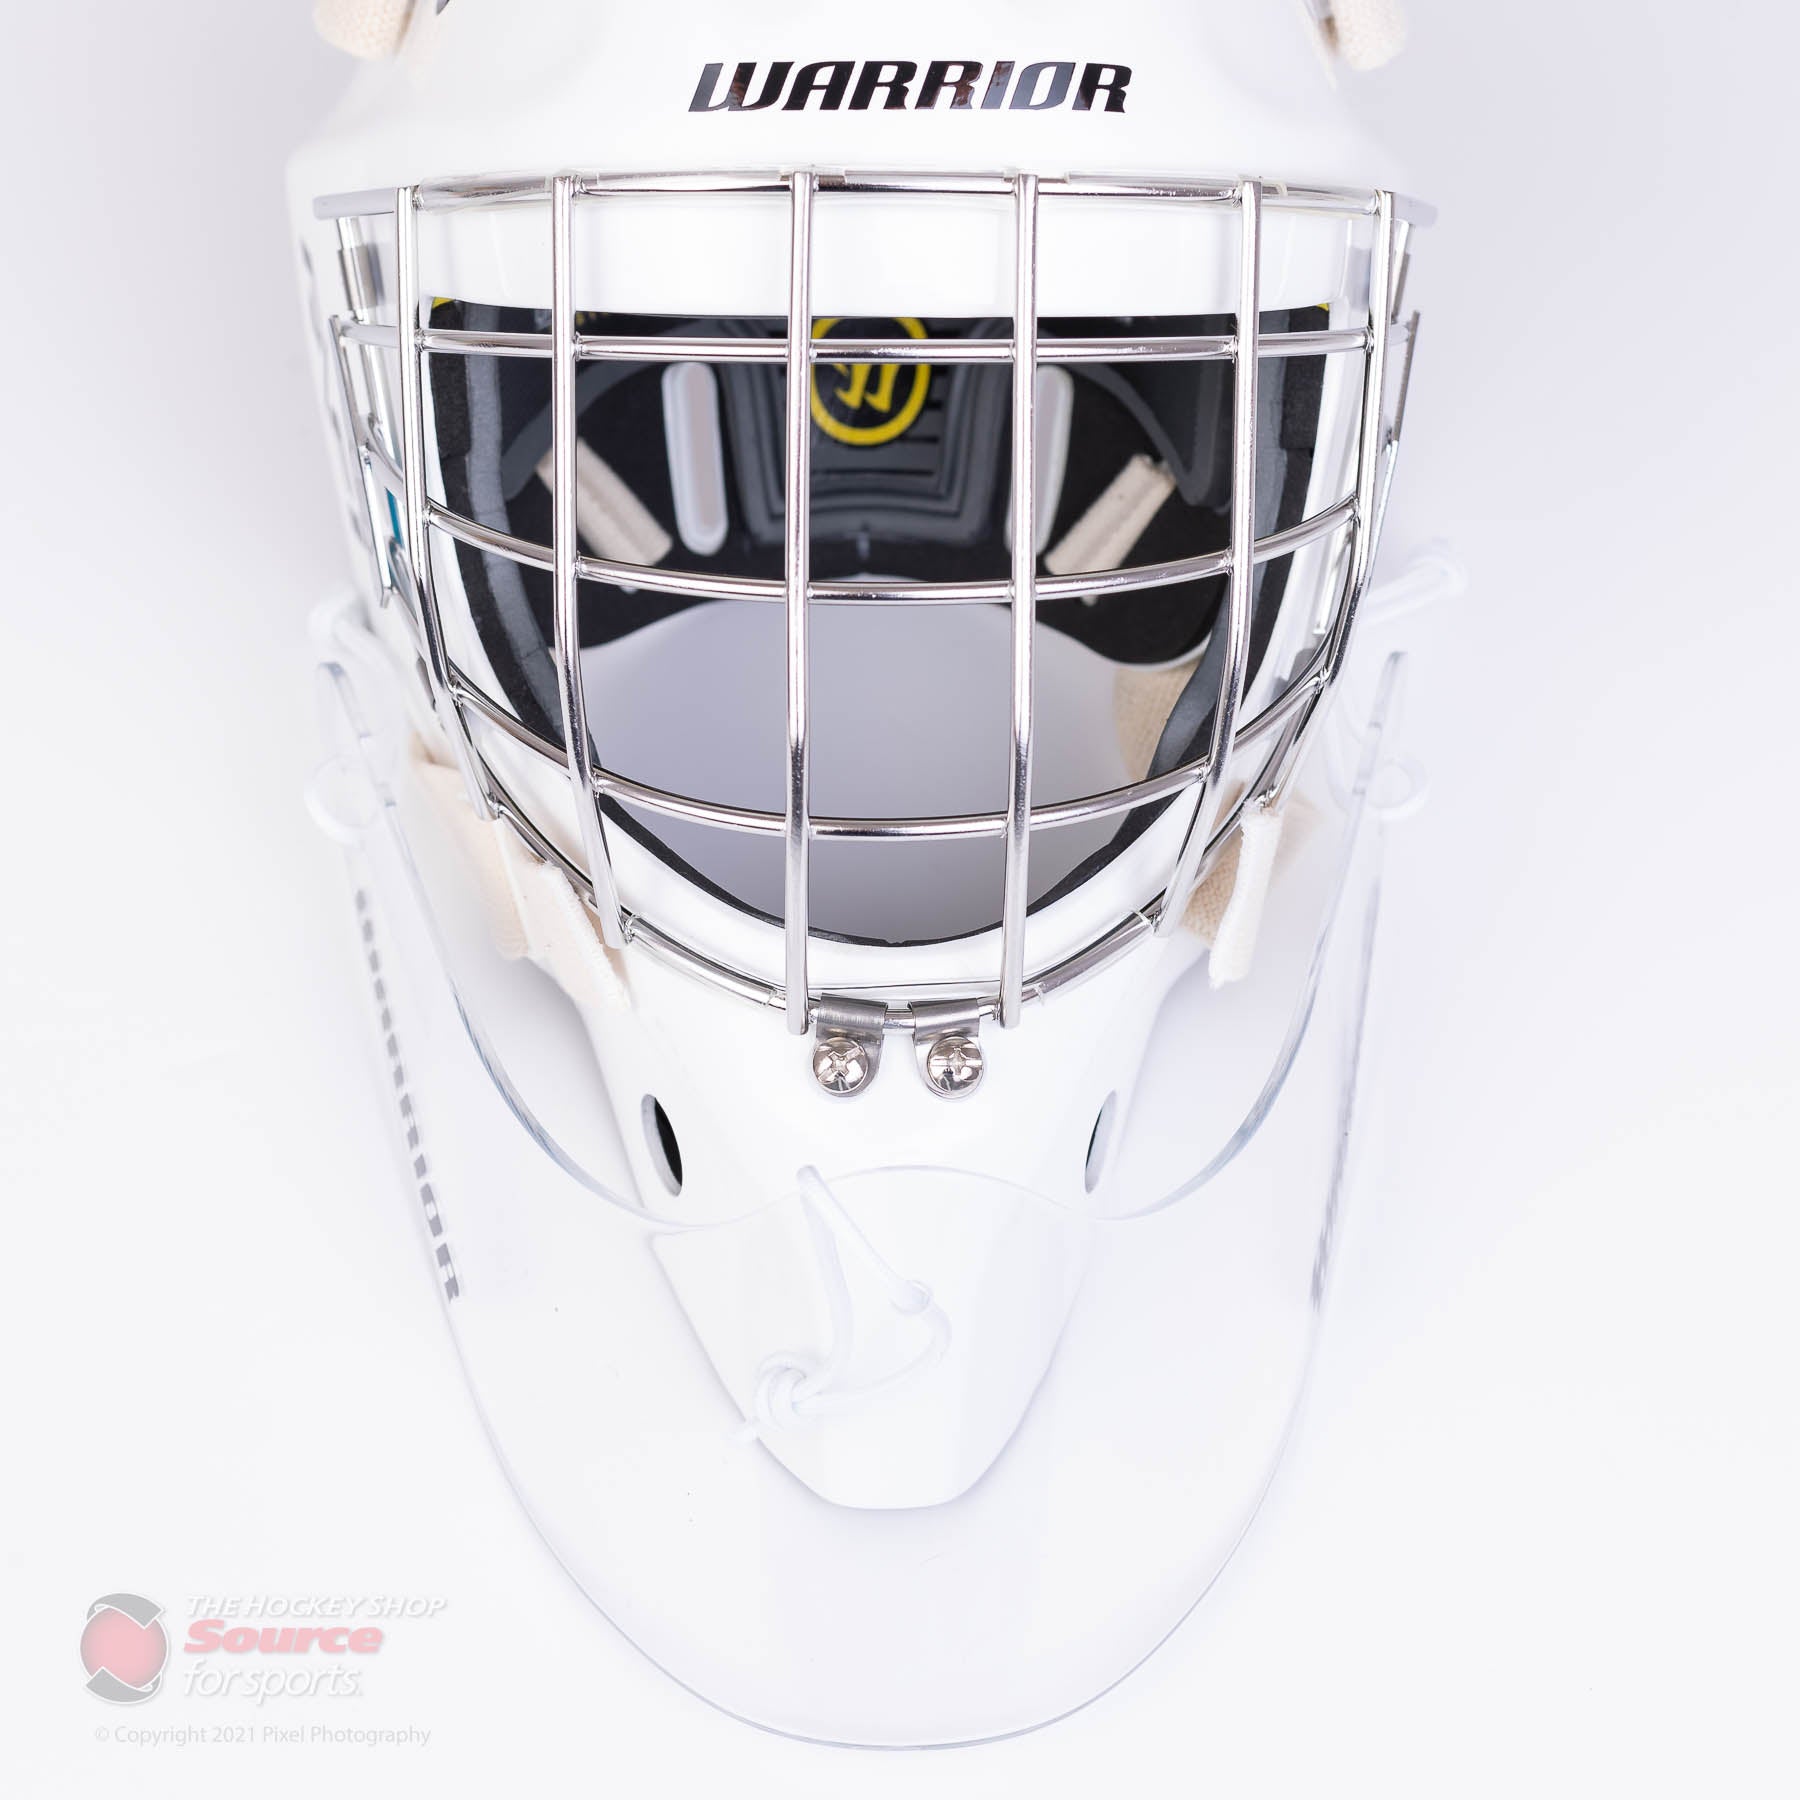 Dangler placement - Masks + Cages + Neck Guards - THE GOAL[ie] NET[work]